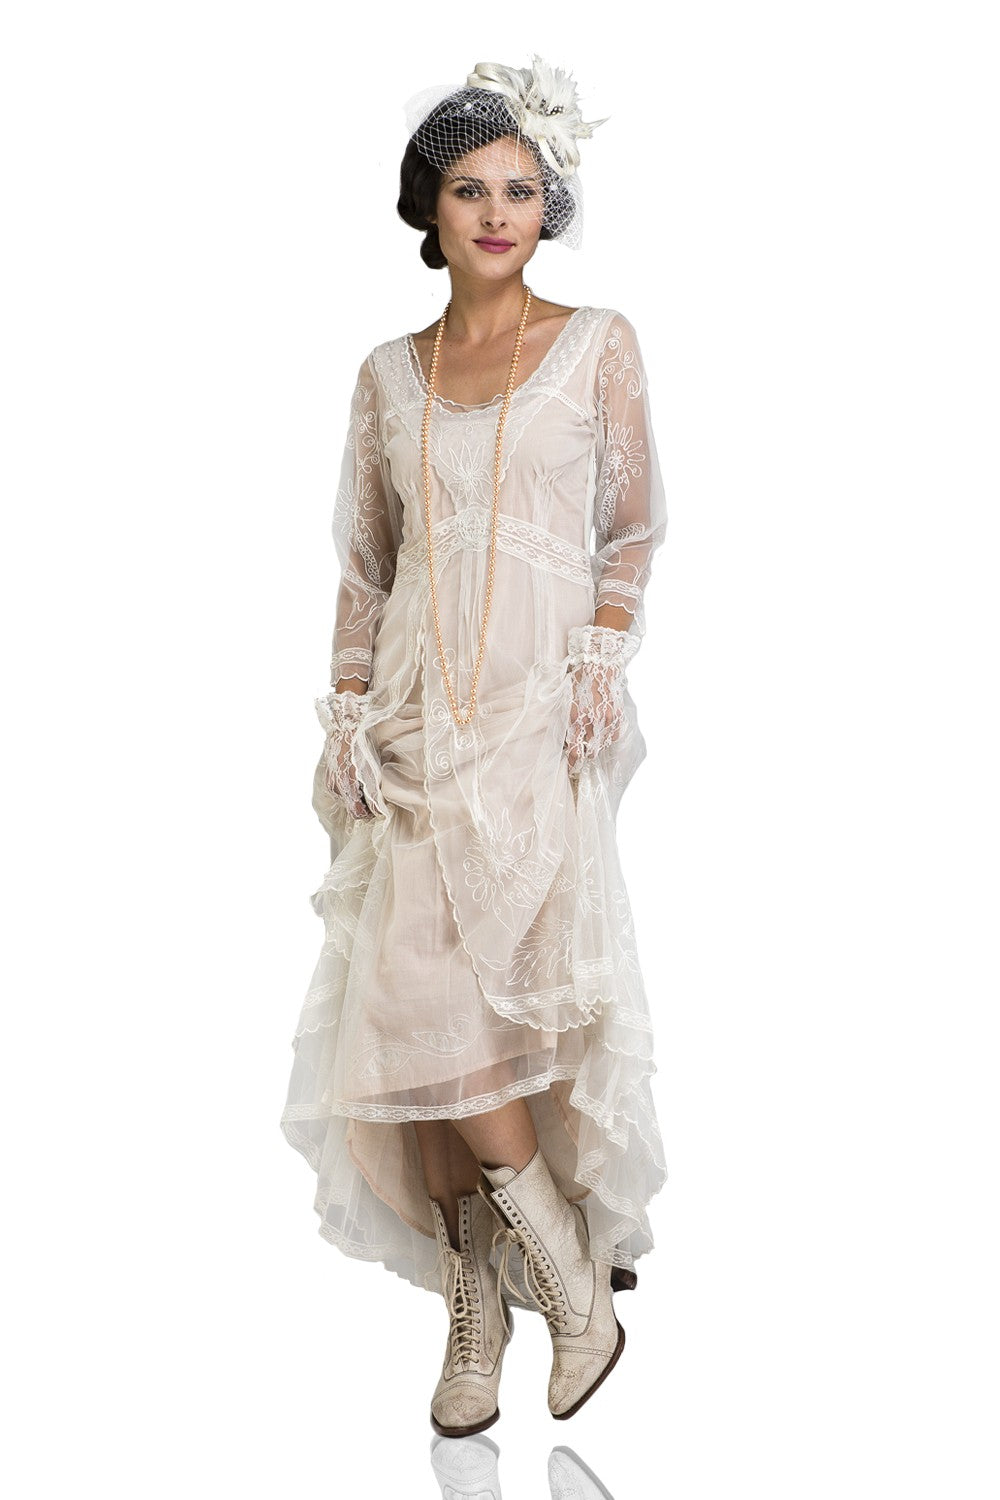 1900s Edwardian Dress, 1910s Dresses and Gowns Downton Abbey Tea Party Gown in Ivory by Nataya $275.00 AT vintagedancer.com